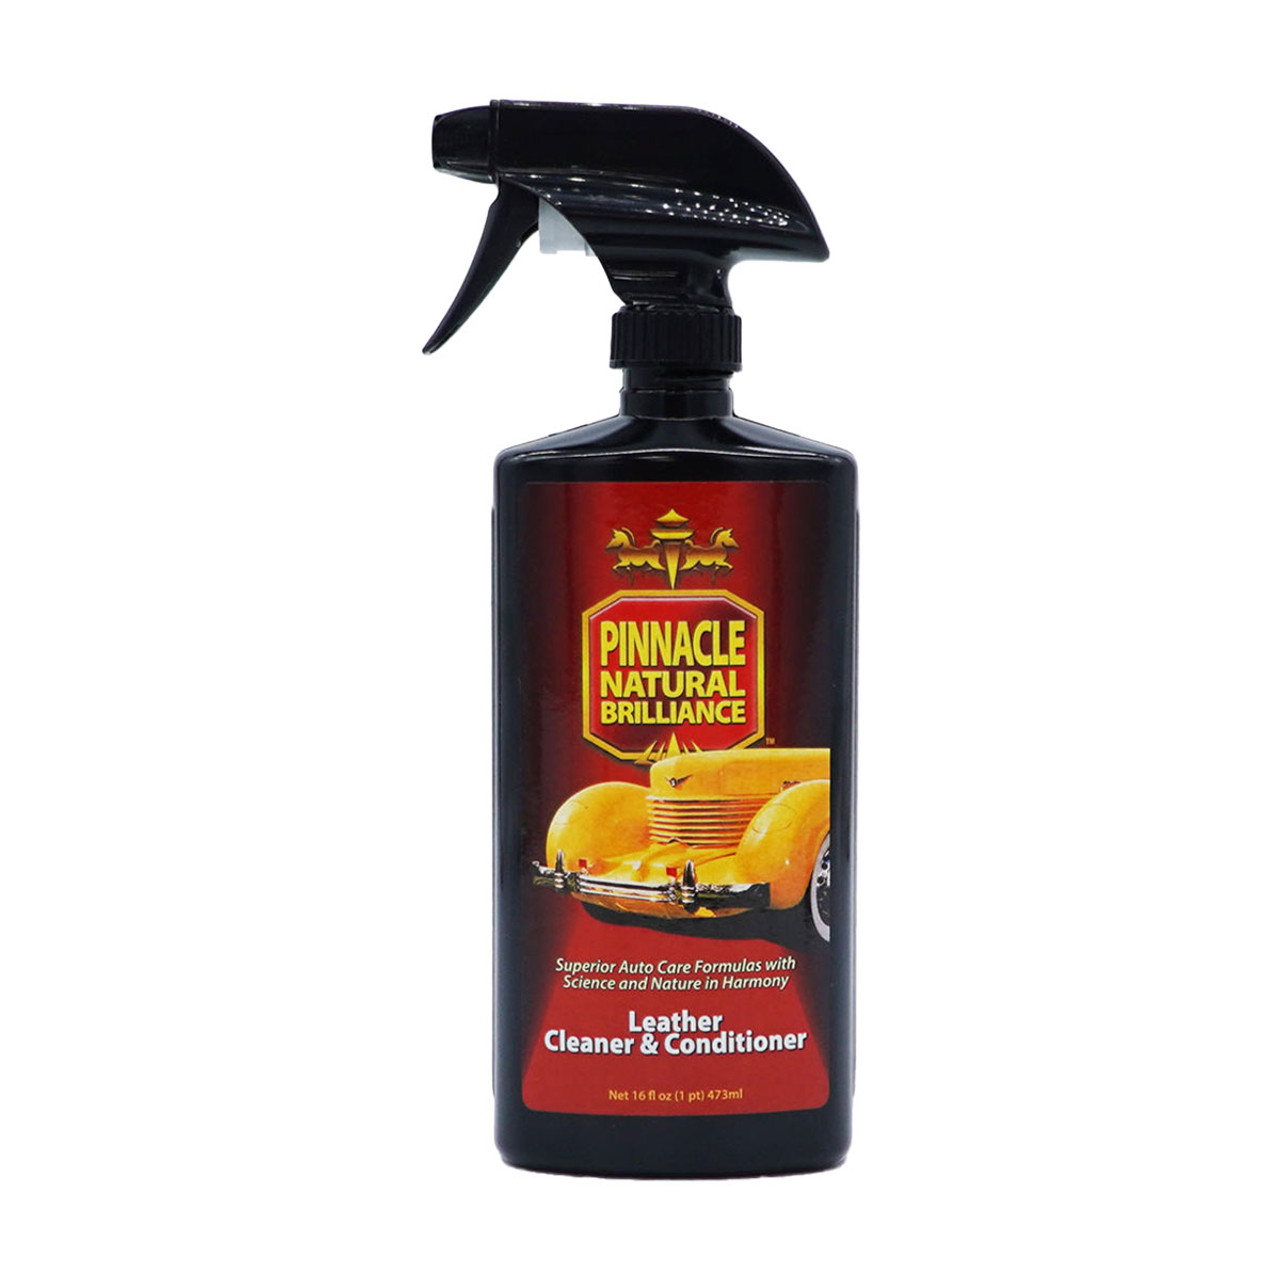 Pinnacle Leather Cleaner & Conditioner